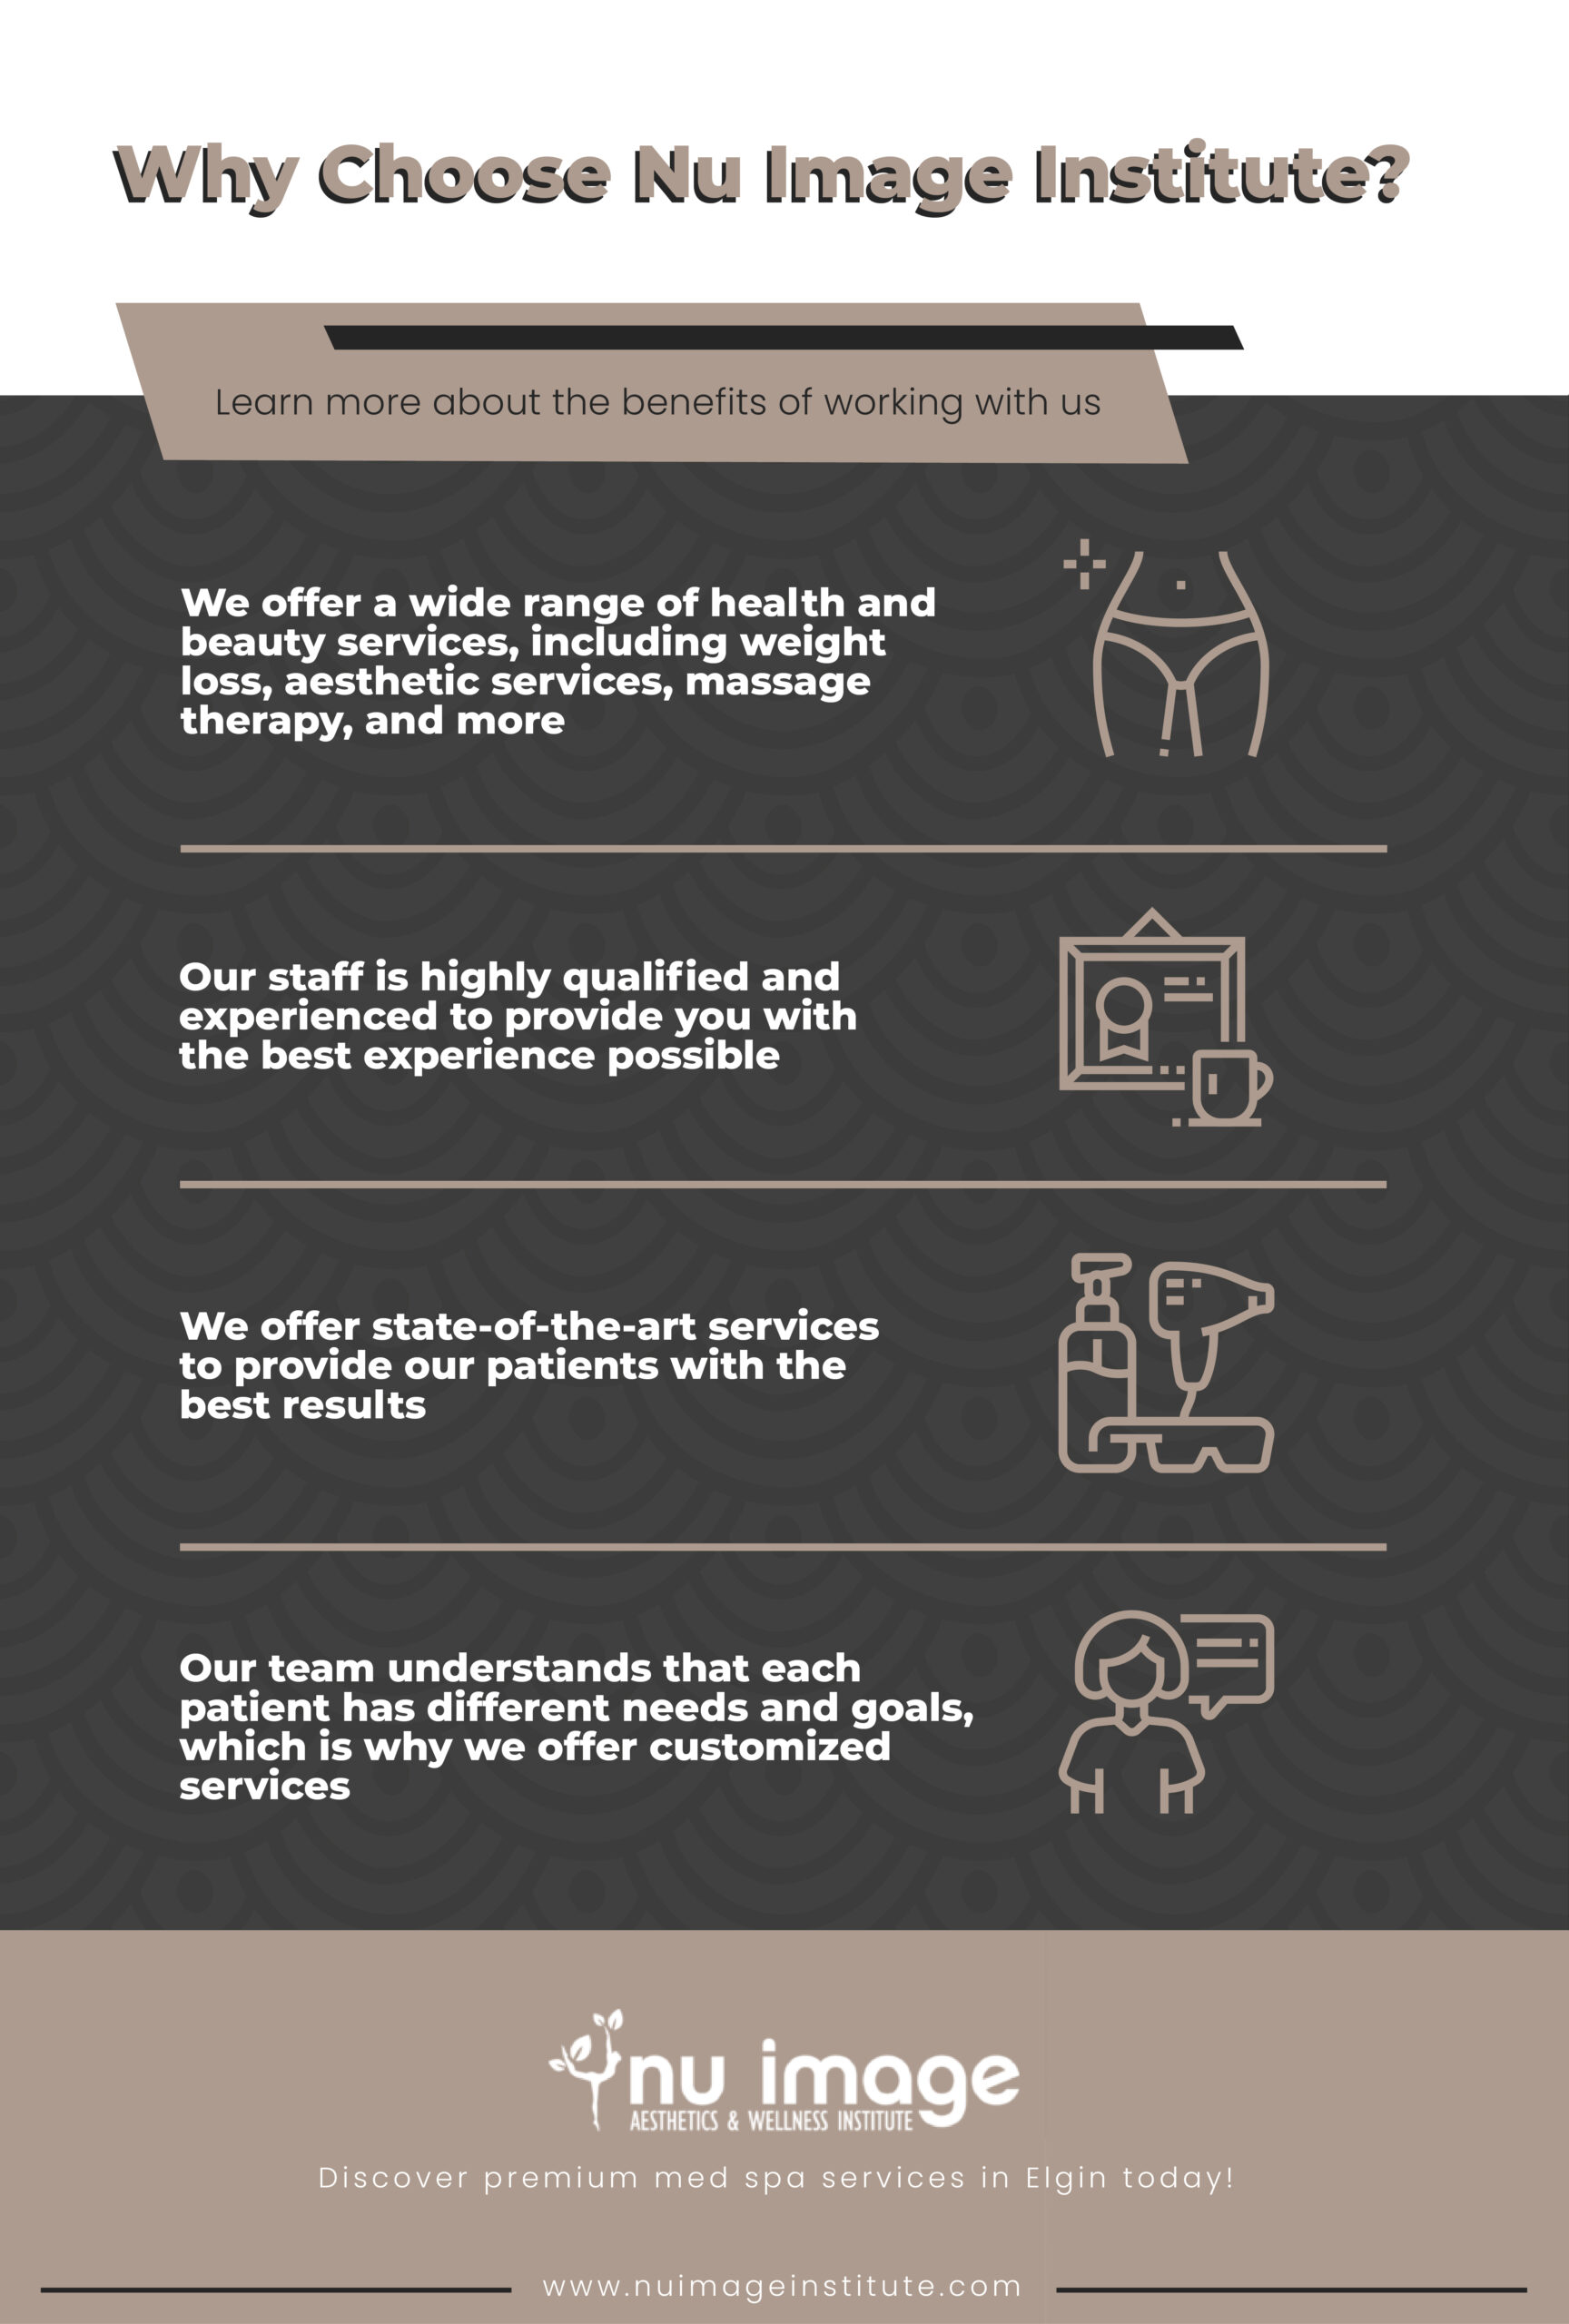 Why Choose Nu Image Institute infographic-01